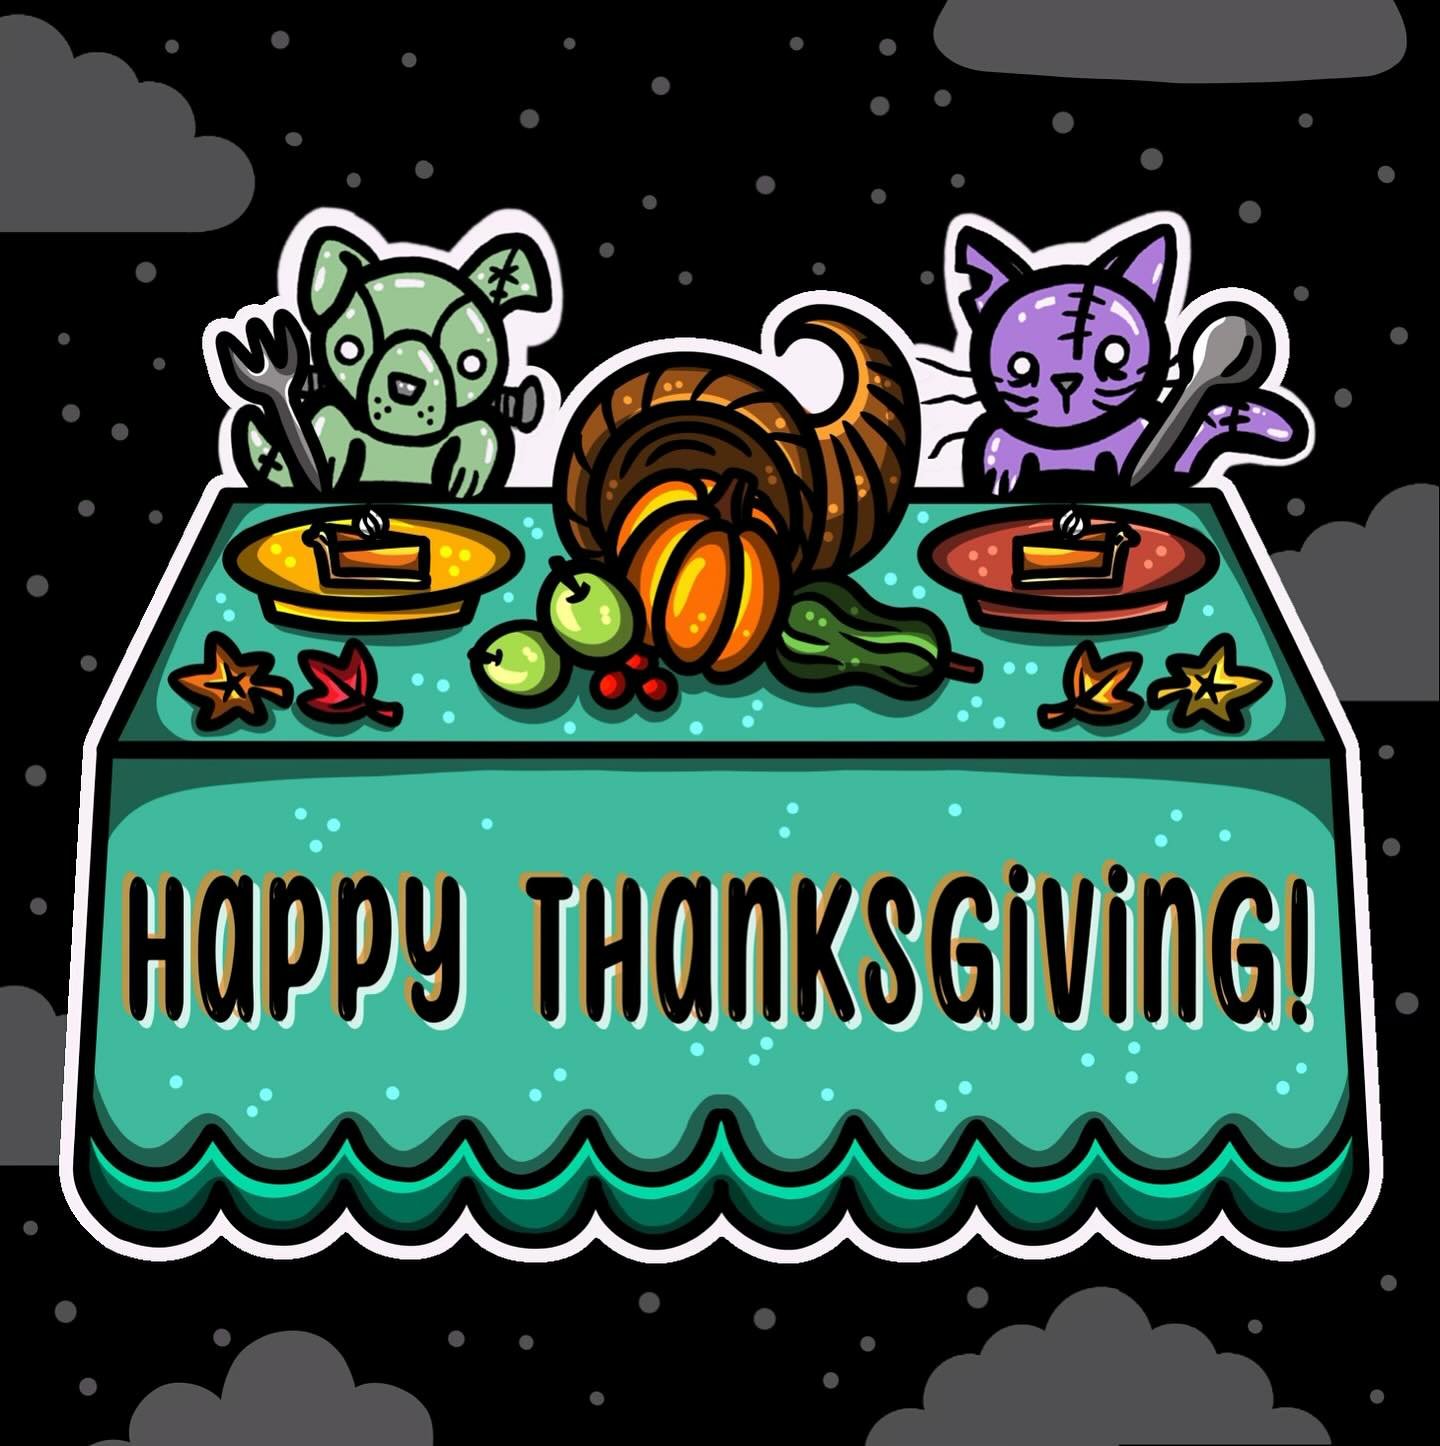 All of us at Night of the Living Pets want to wish you a very Happy Thanksgiving! 🍁

To our clients: 

There isn&rsquo;t enough time in the day to express our gratitude for you and your pets. Our growth could not happen without your support, trust a